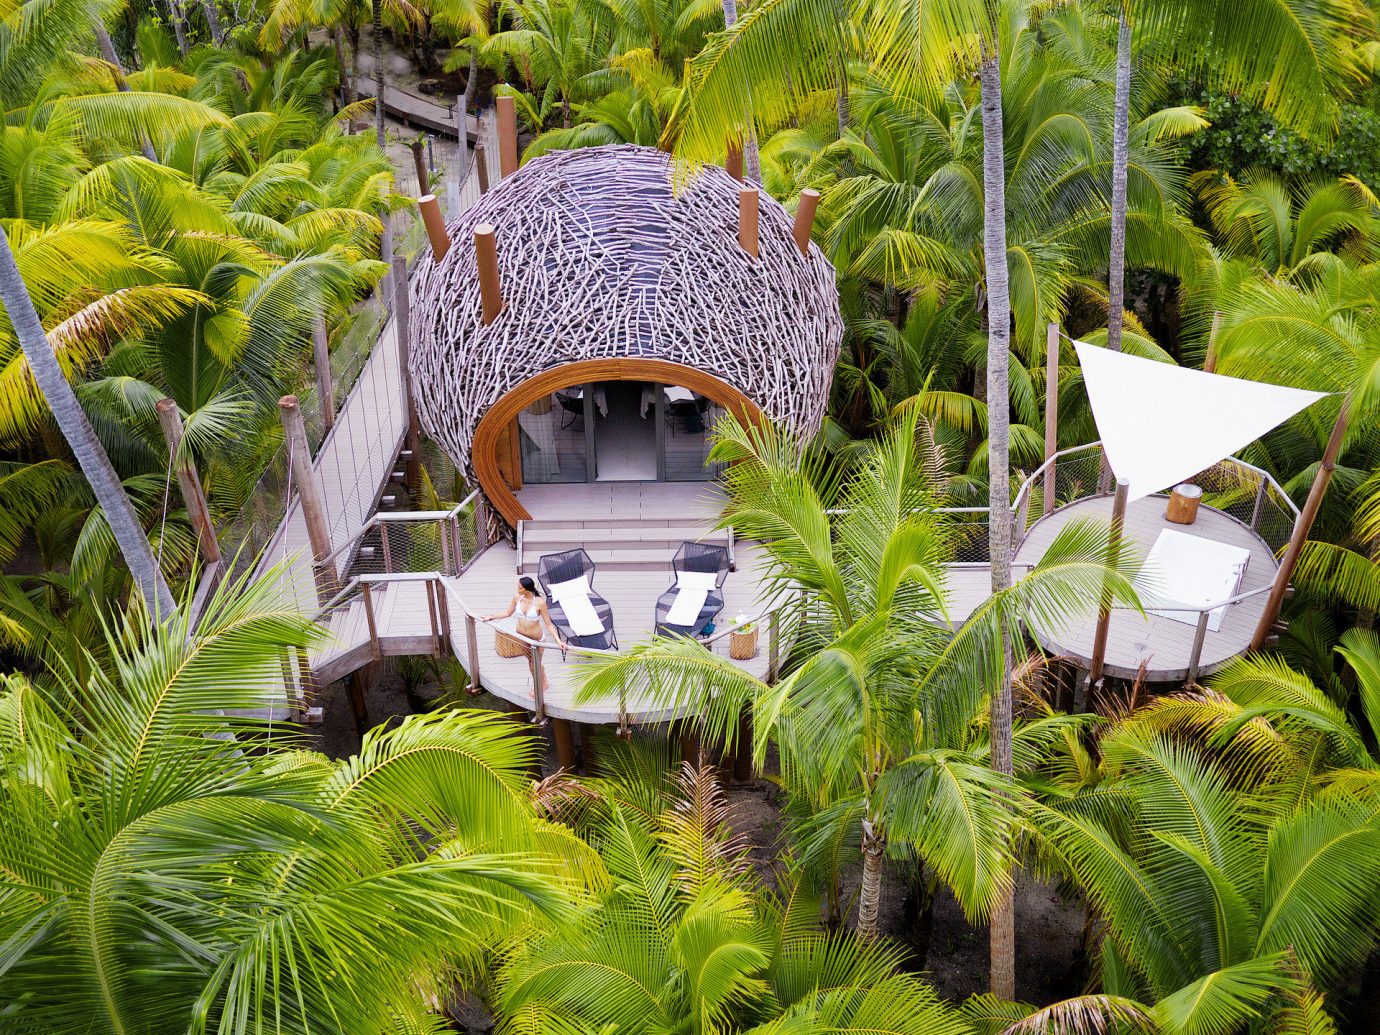 aerial Balcony calm Greenery Hotels hut isolation lounge chairs Luxury Luxury Travel open-air palm trees Patio private remote serene Terrace Tropical tree habitat outdoor natural environment ecosystem Resort botany Jungle rainforest Garden tropics arecales Forest flower botanical garden plant surrounded lush